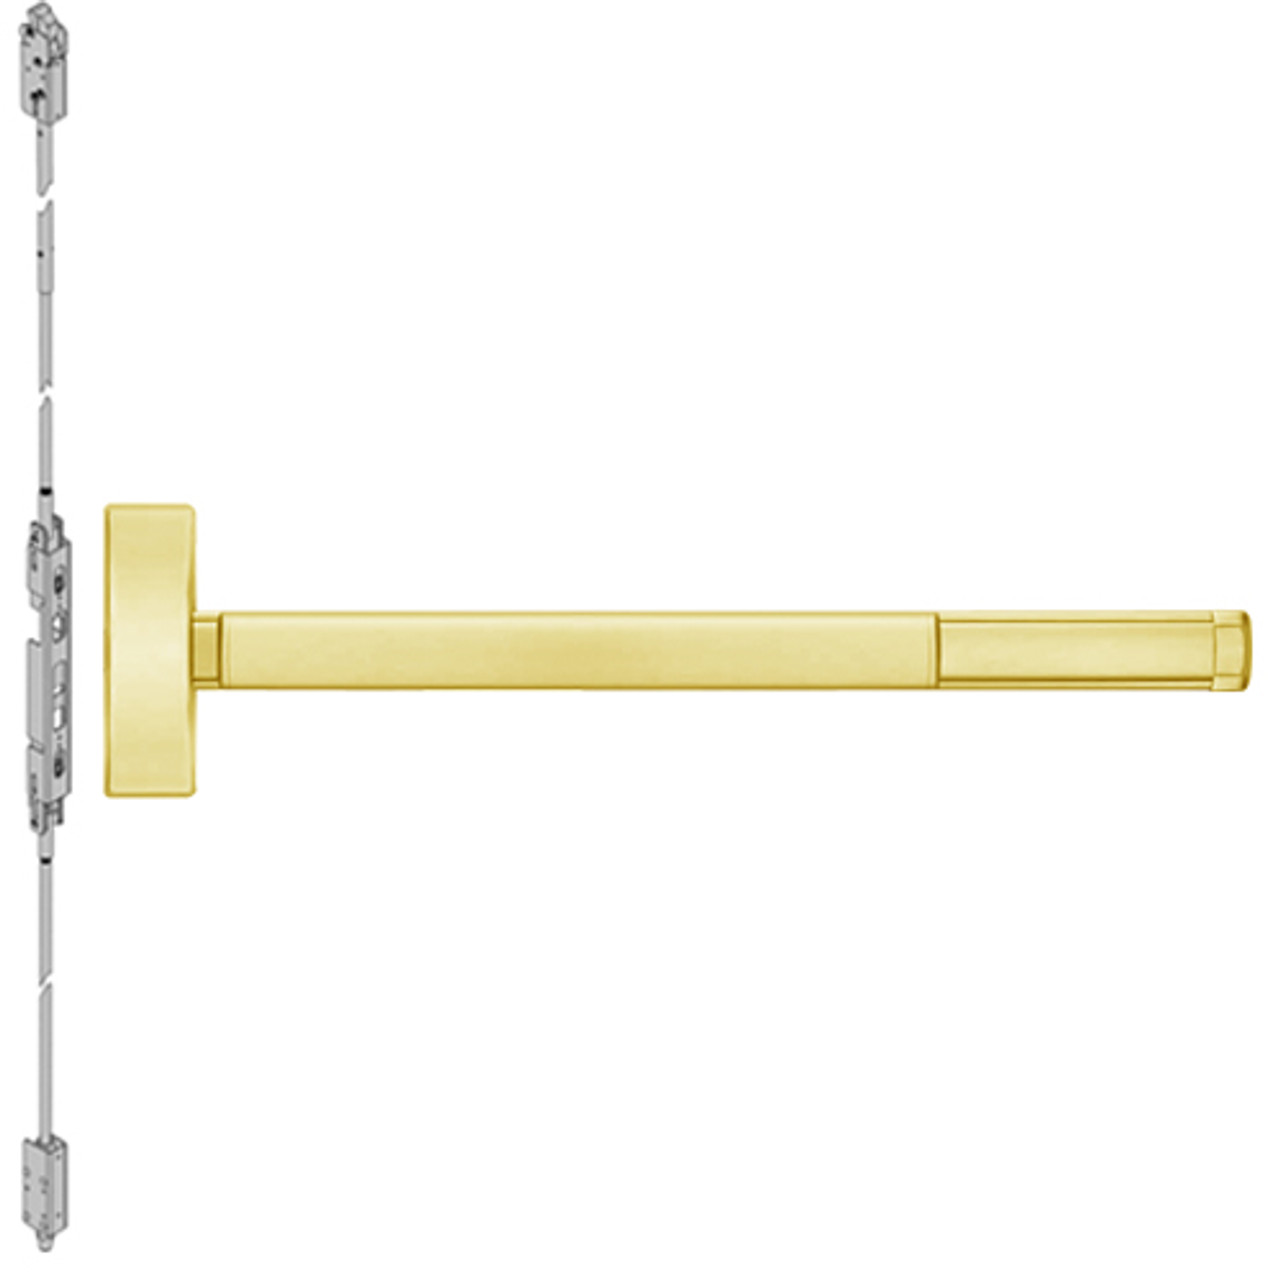 ELRFL2808-605-36 PHI 2800 Series Fire Rated Concealed Vertical Rod Exit Device with Electric Latch Retraction Prepped for Key Controls Lever-Knob in Bright Brass Finish